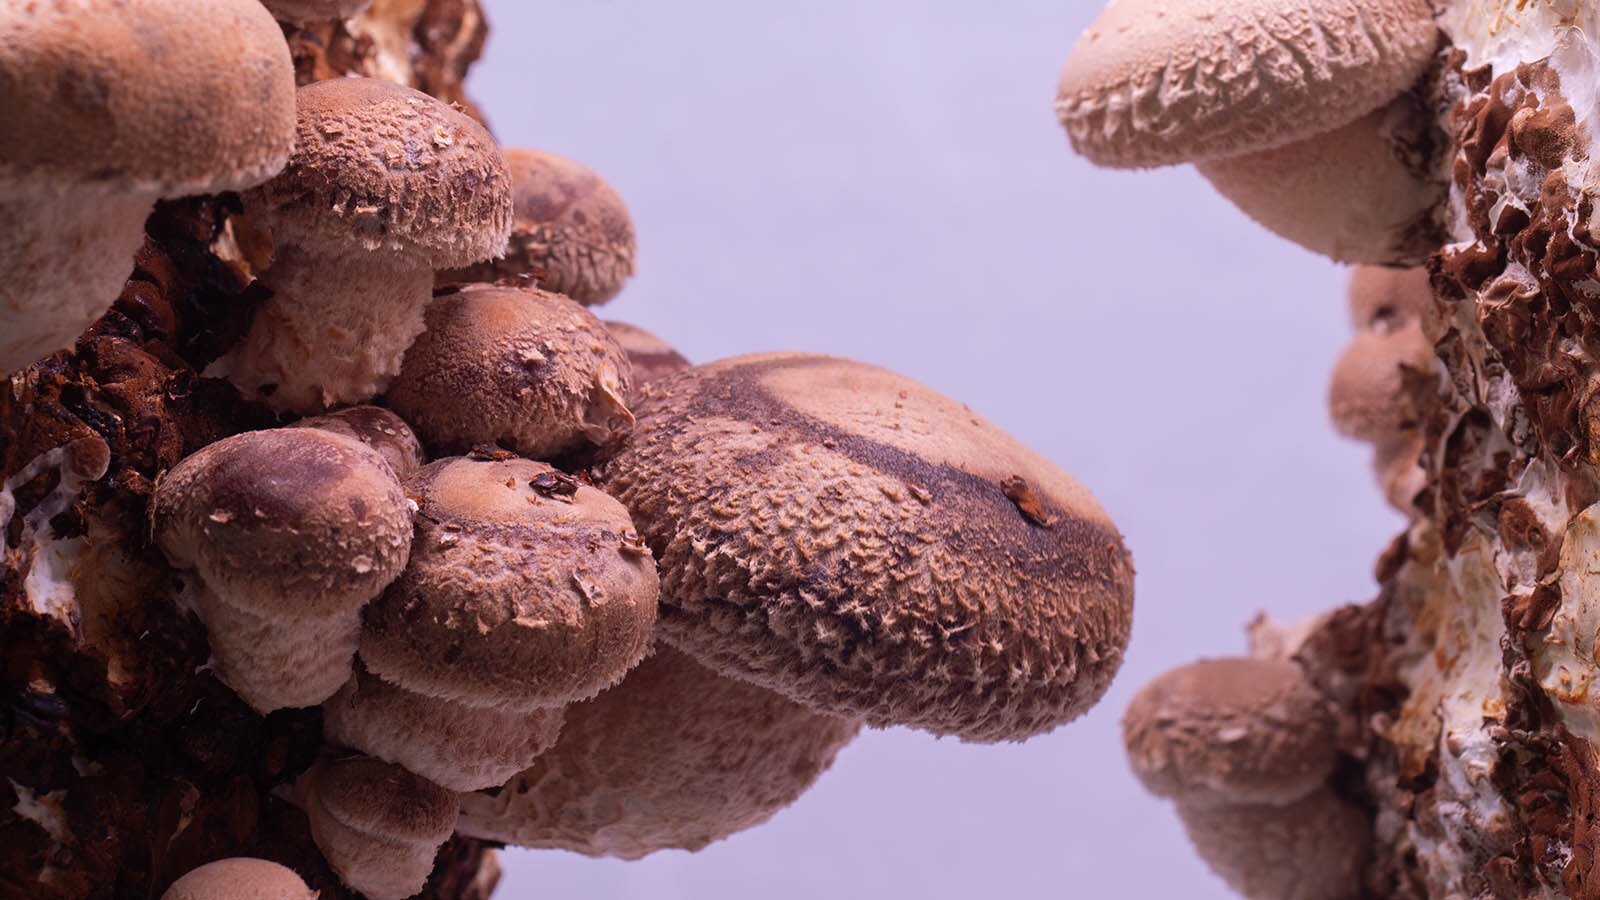 One of the most famous and revered culinary mushrooms, the shiitake.